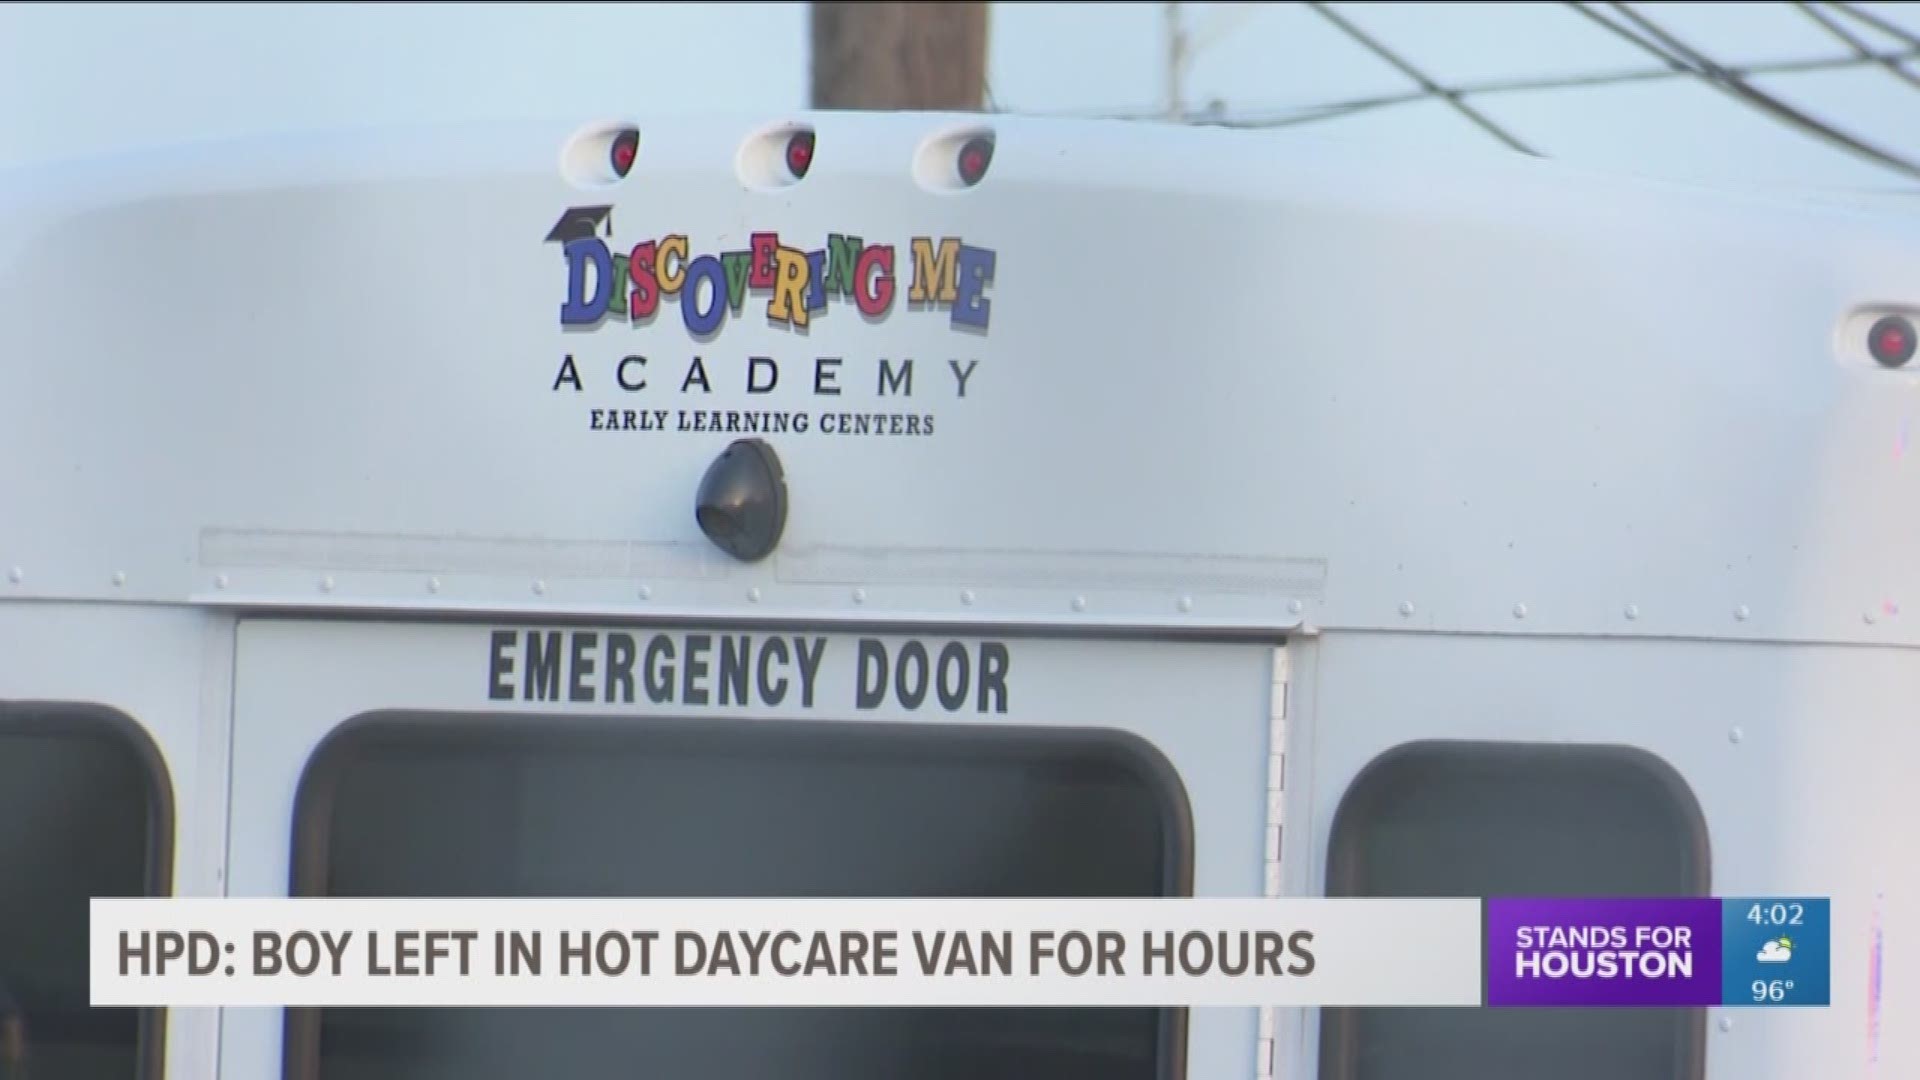 At a press conference held by Houston Police on Friday, officials said the 3 year old boy who died after being left in a hot van at daycare was inside the vehicle for hours.